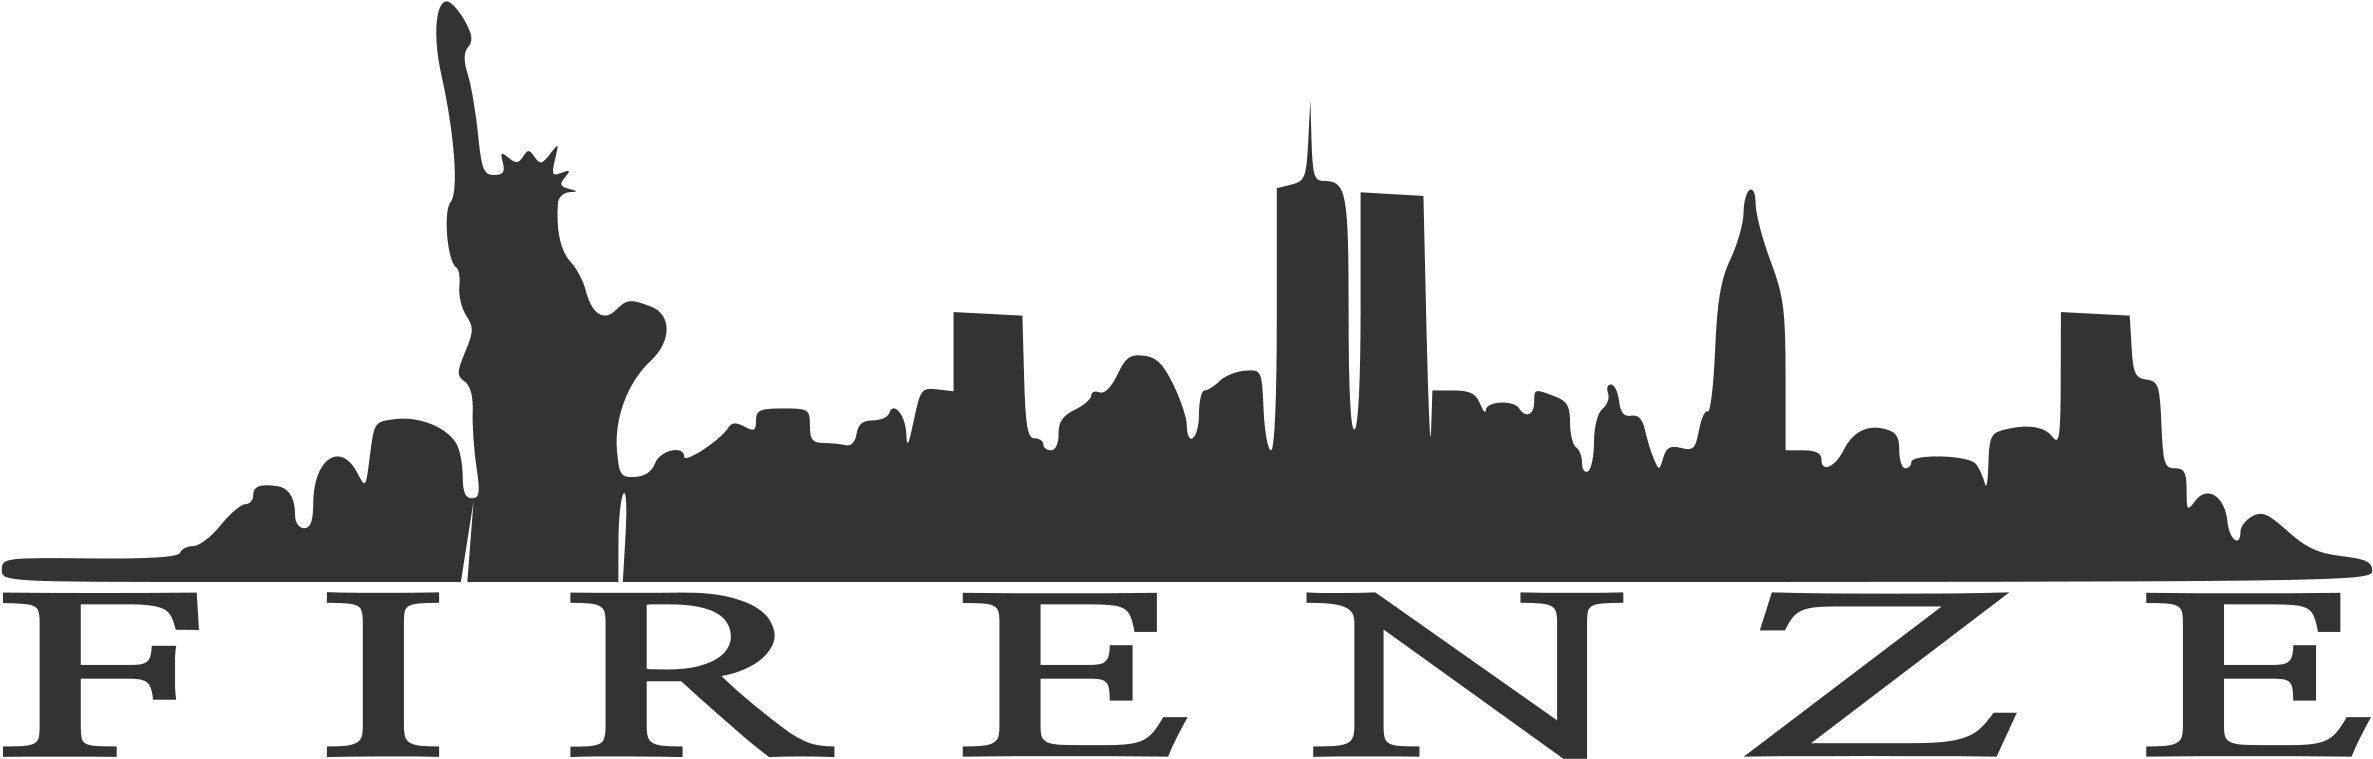 New_ York_ City_ Silhouette_with_ Firenze_ Text PNG